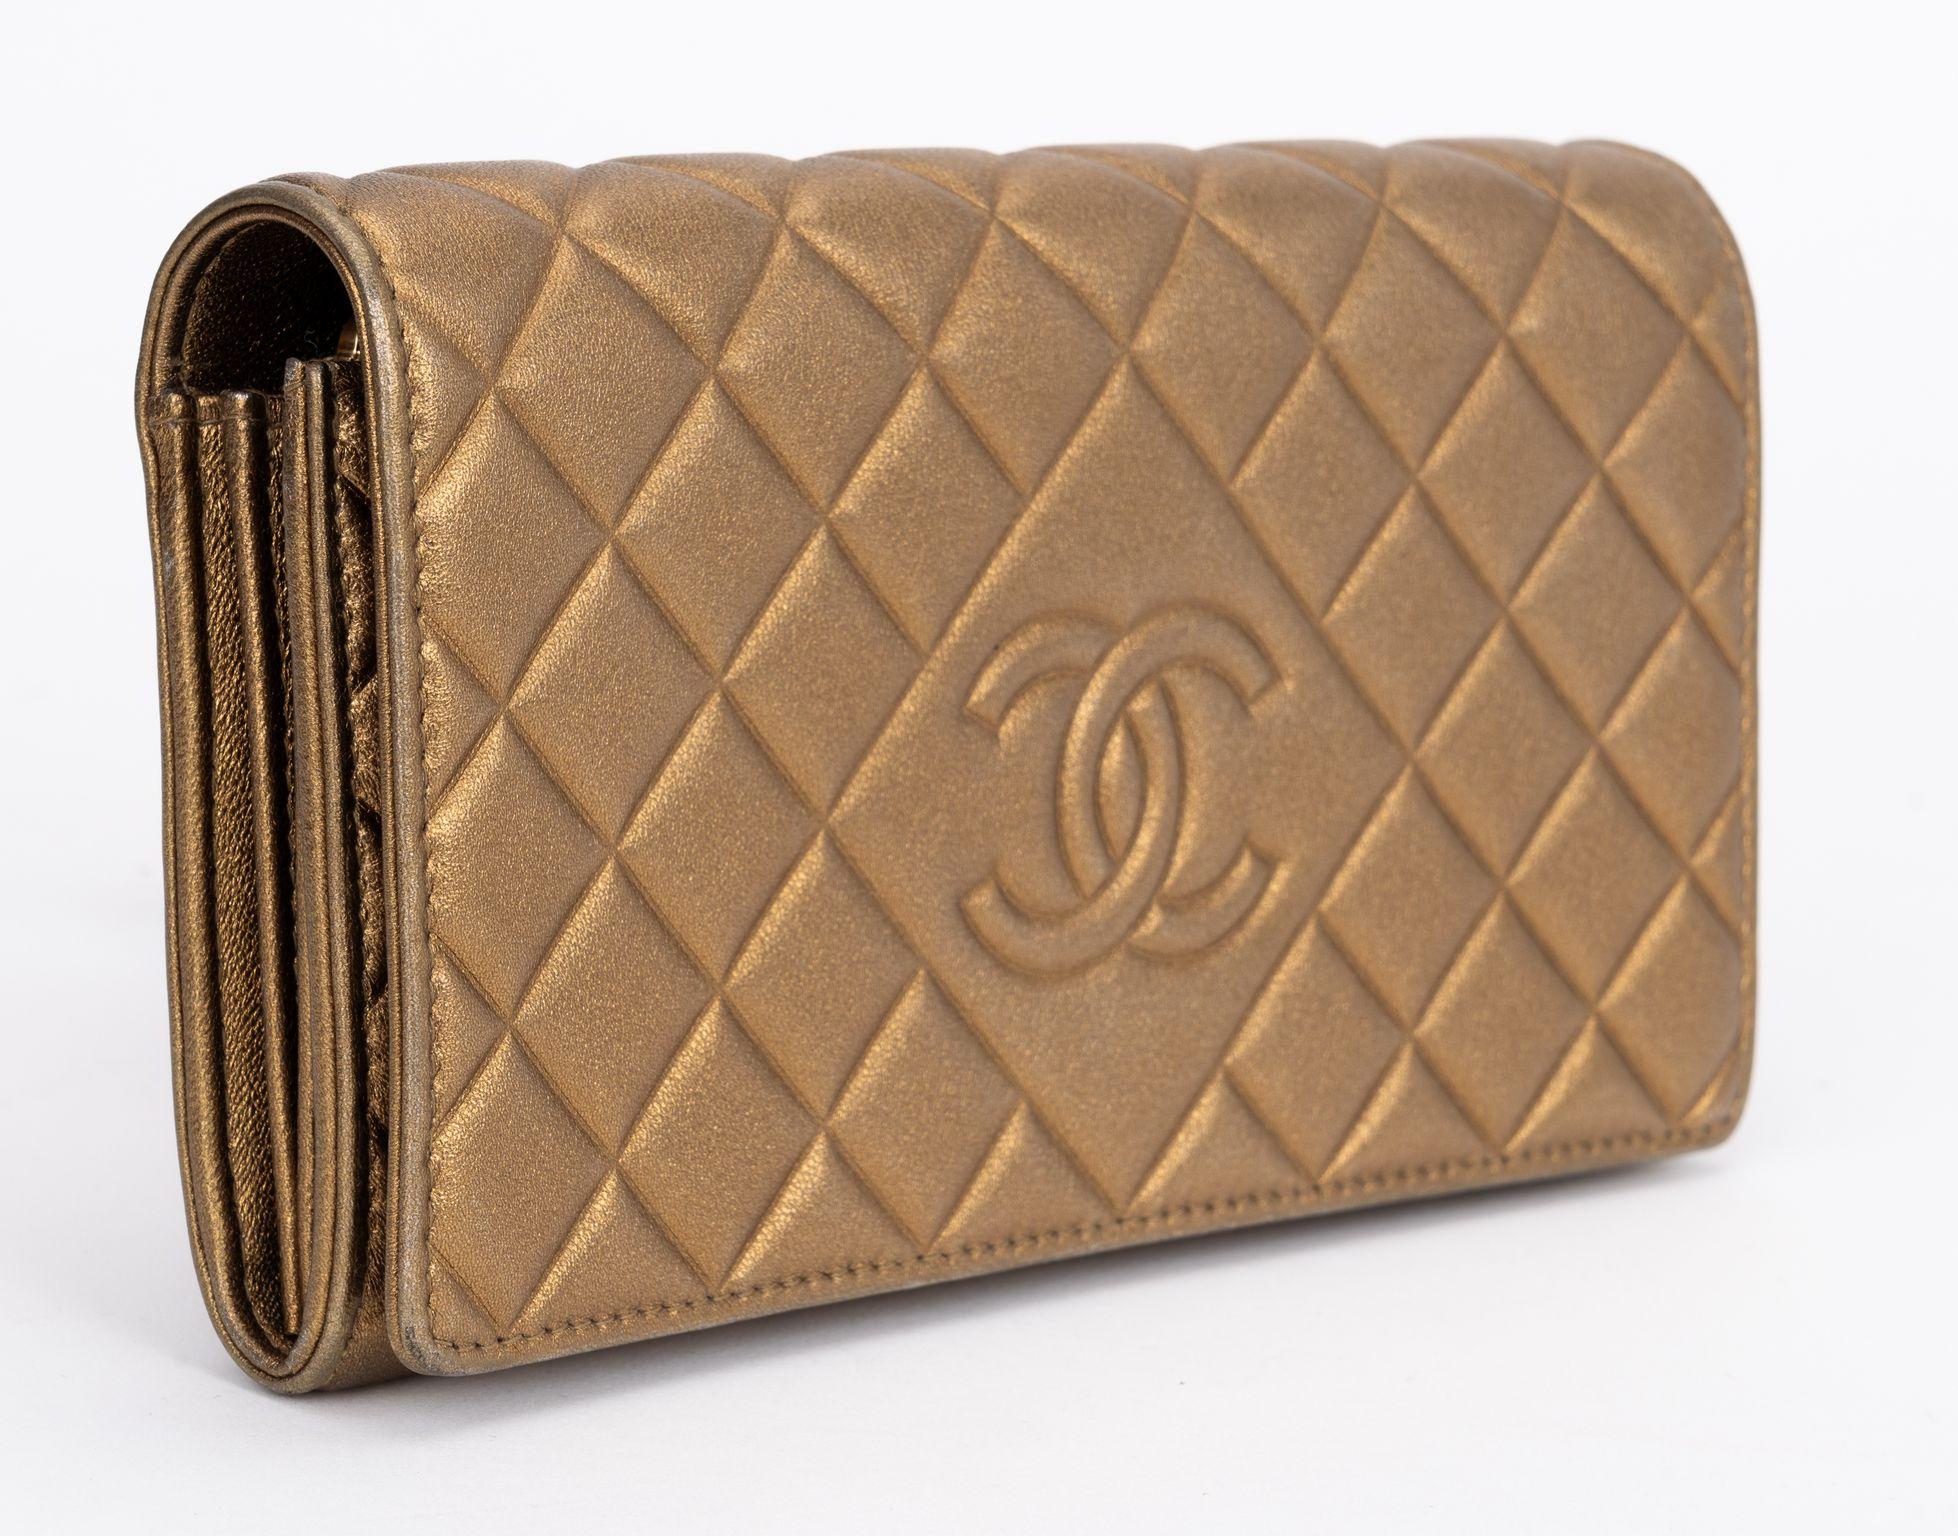 Chanel excellent condition bronze leather quilted large wallet, multiple cards slots and center zipped compartment. Collection 21. Comes with hologram and original dust cover.